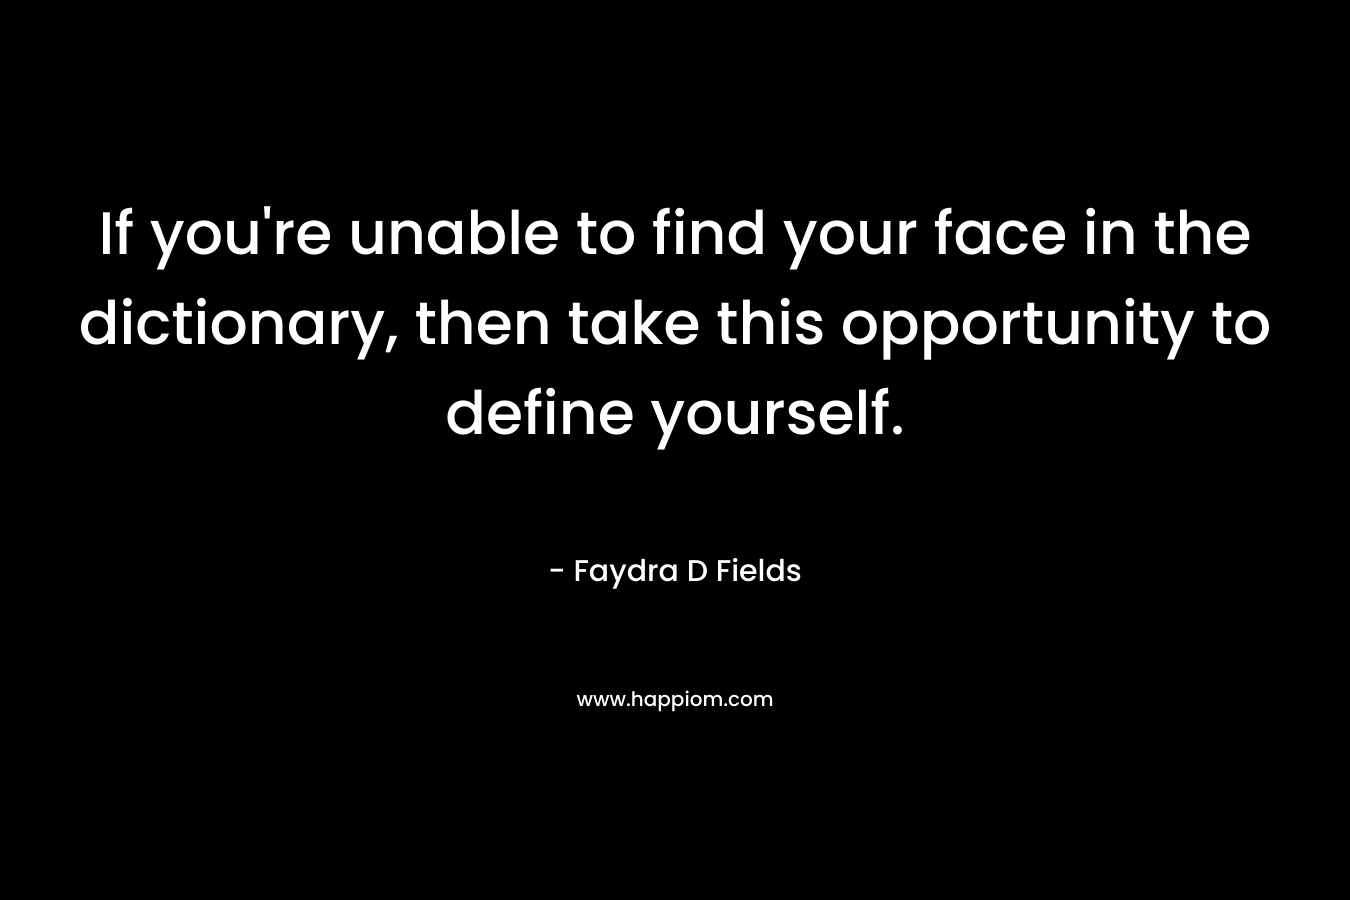 If you’re unable to find your face in the dictionary, then take this opportunity to define yourself. – Faydra D Fields